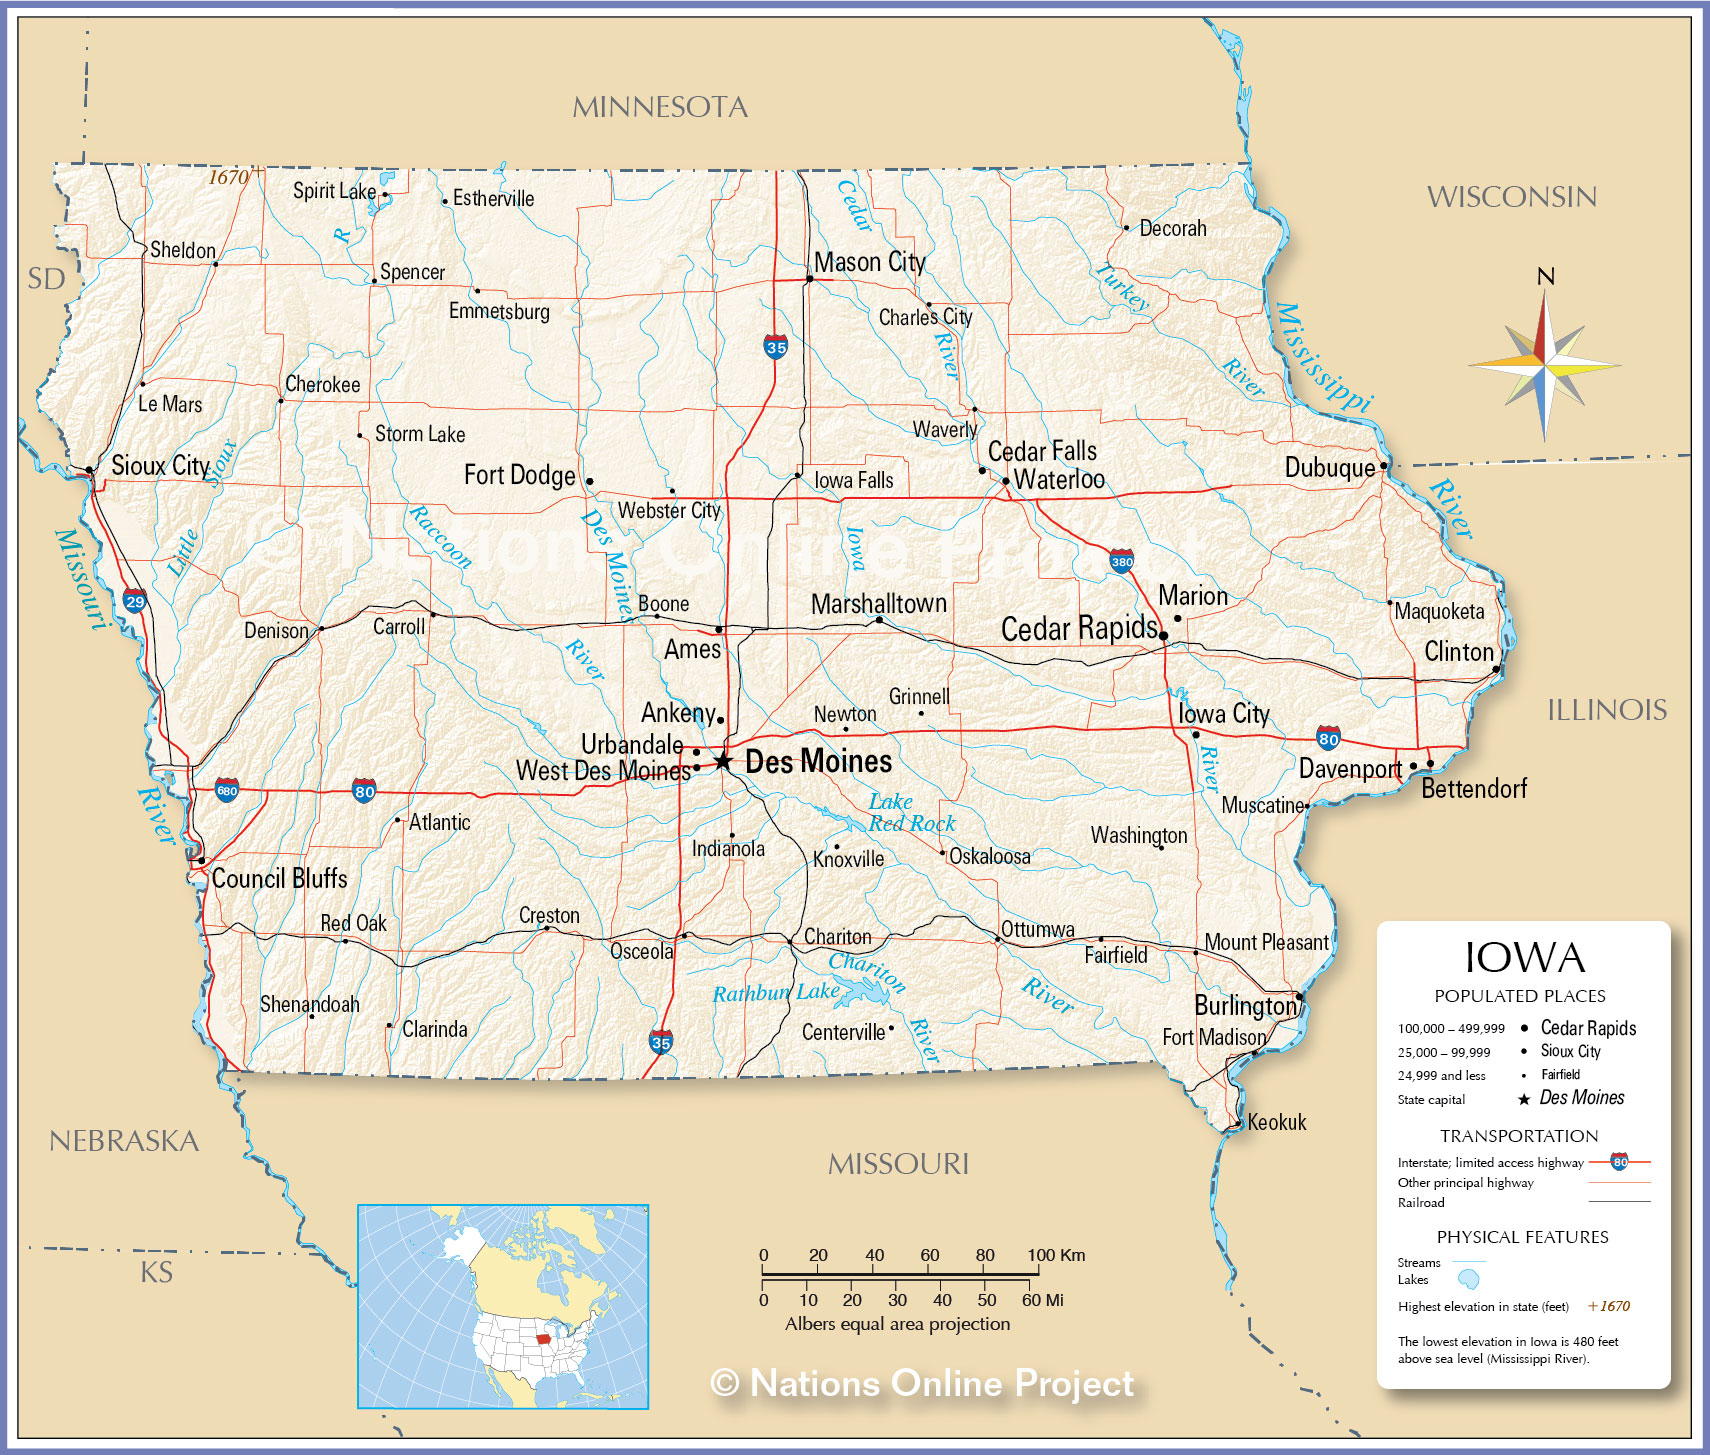 reference-maps-of-iowa-usa-nations-online-project